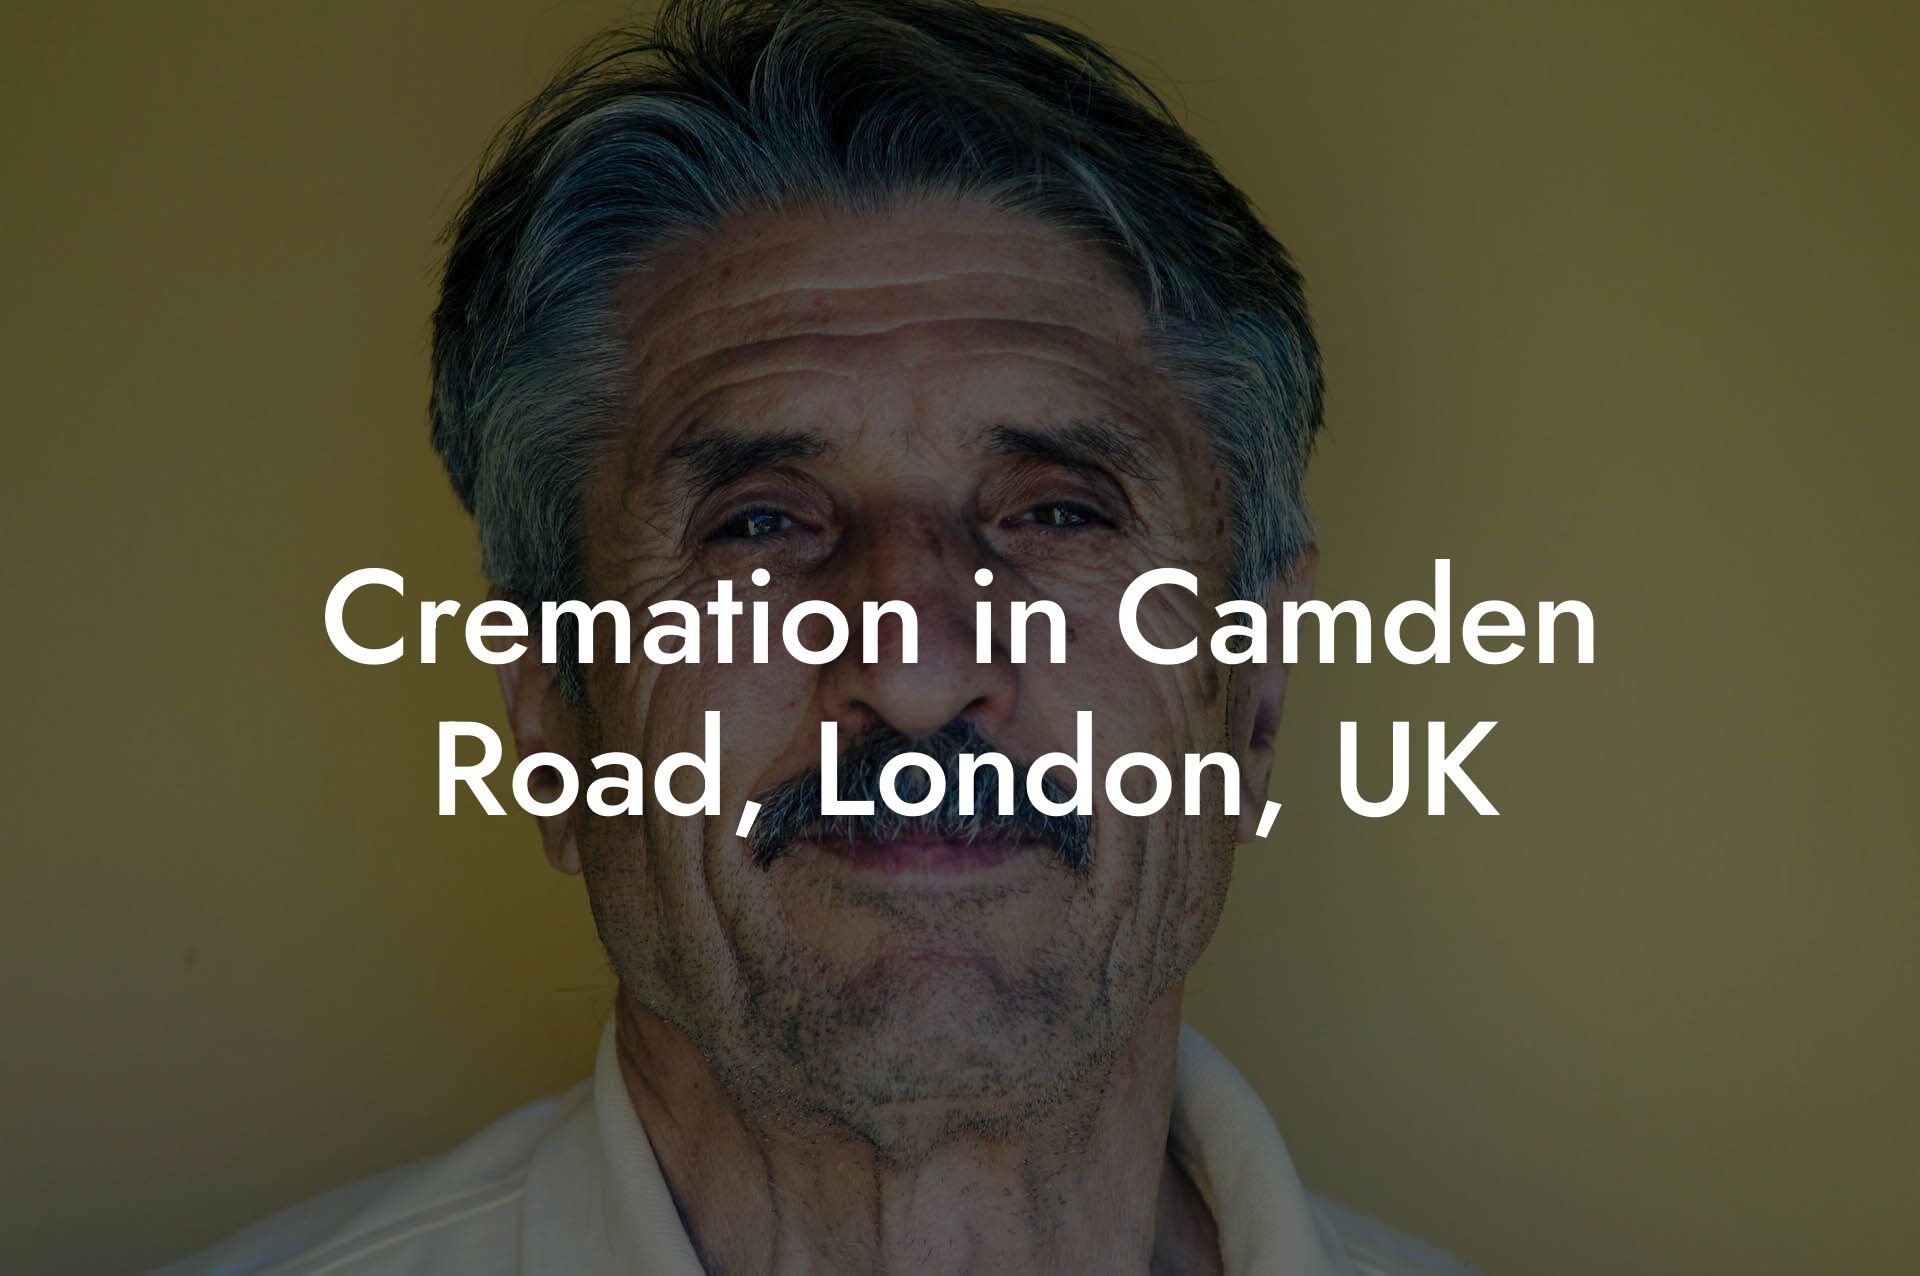 Cremation in Camden Road, London, UK